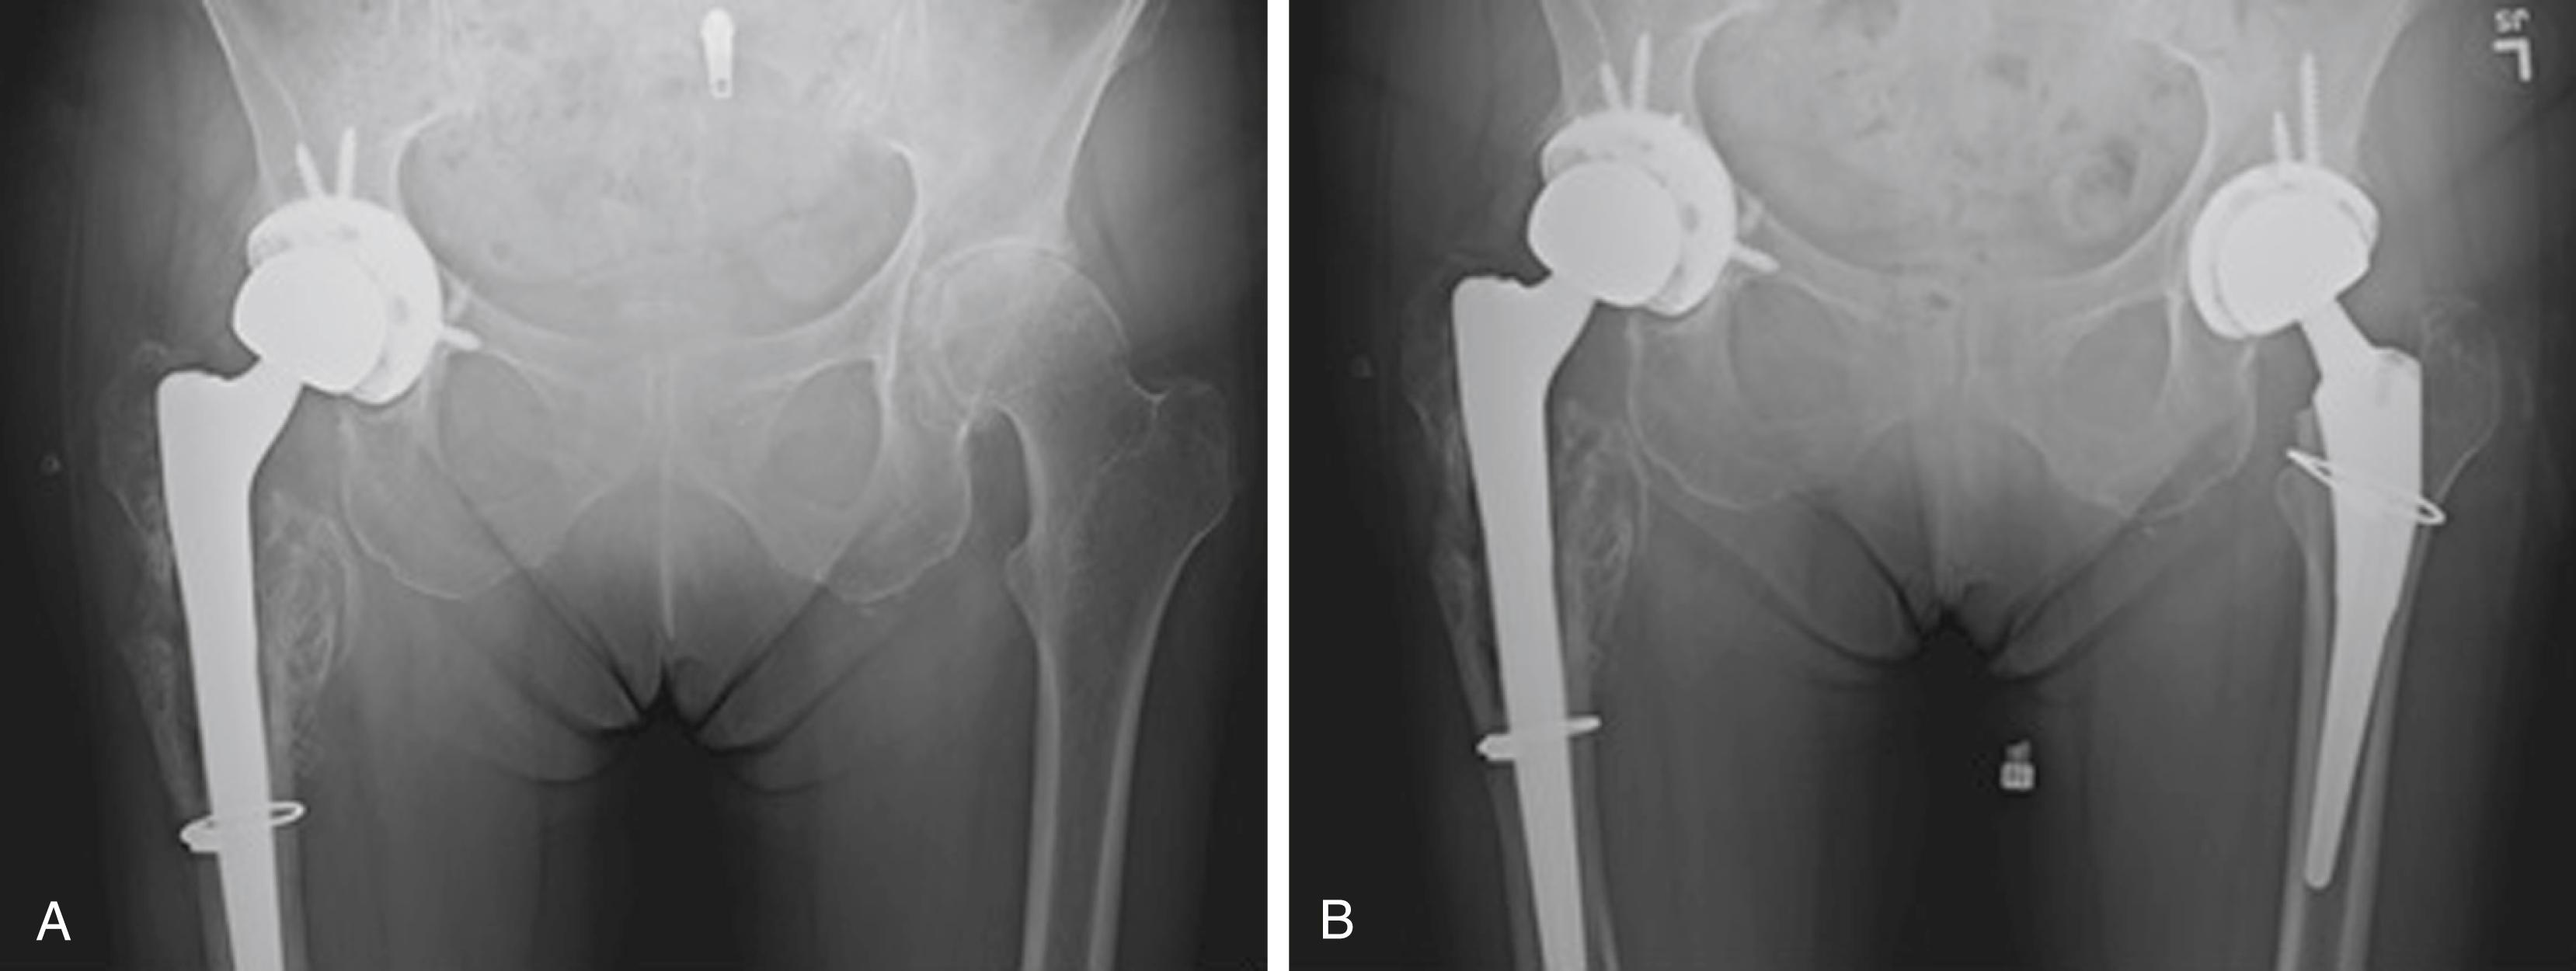 Fig. 21.2, Preoperative (A) and postoperative (B) radiographs of a 78-year-old female who underwent a total hip arthroplasty. Intraoperatively, a calcar fracture was noted during stem insertion, the stem was removed, a cable was placed, and the stem was reinserted. The patient was allowed to weight bear as tolerated and did well postoperatively.